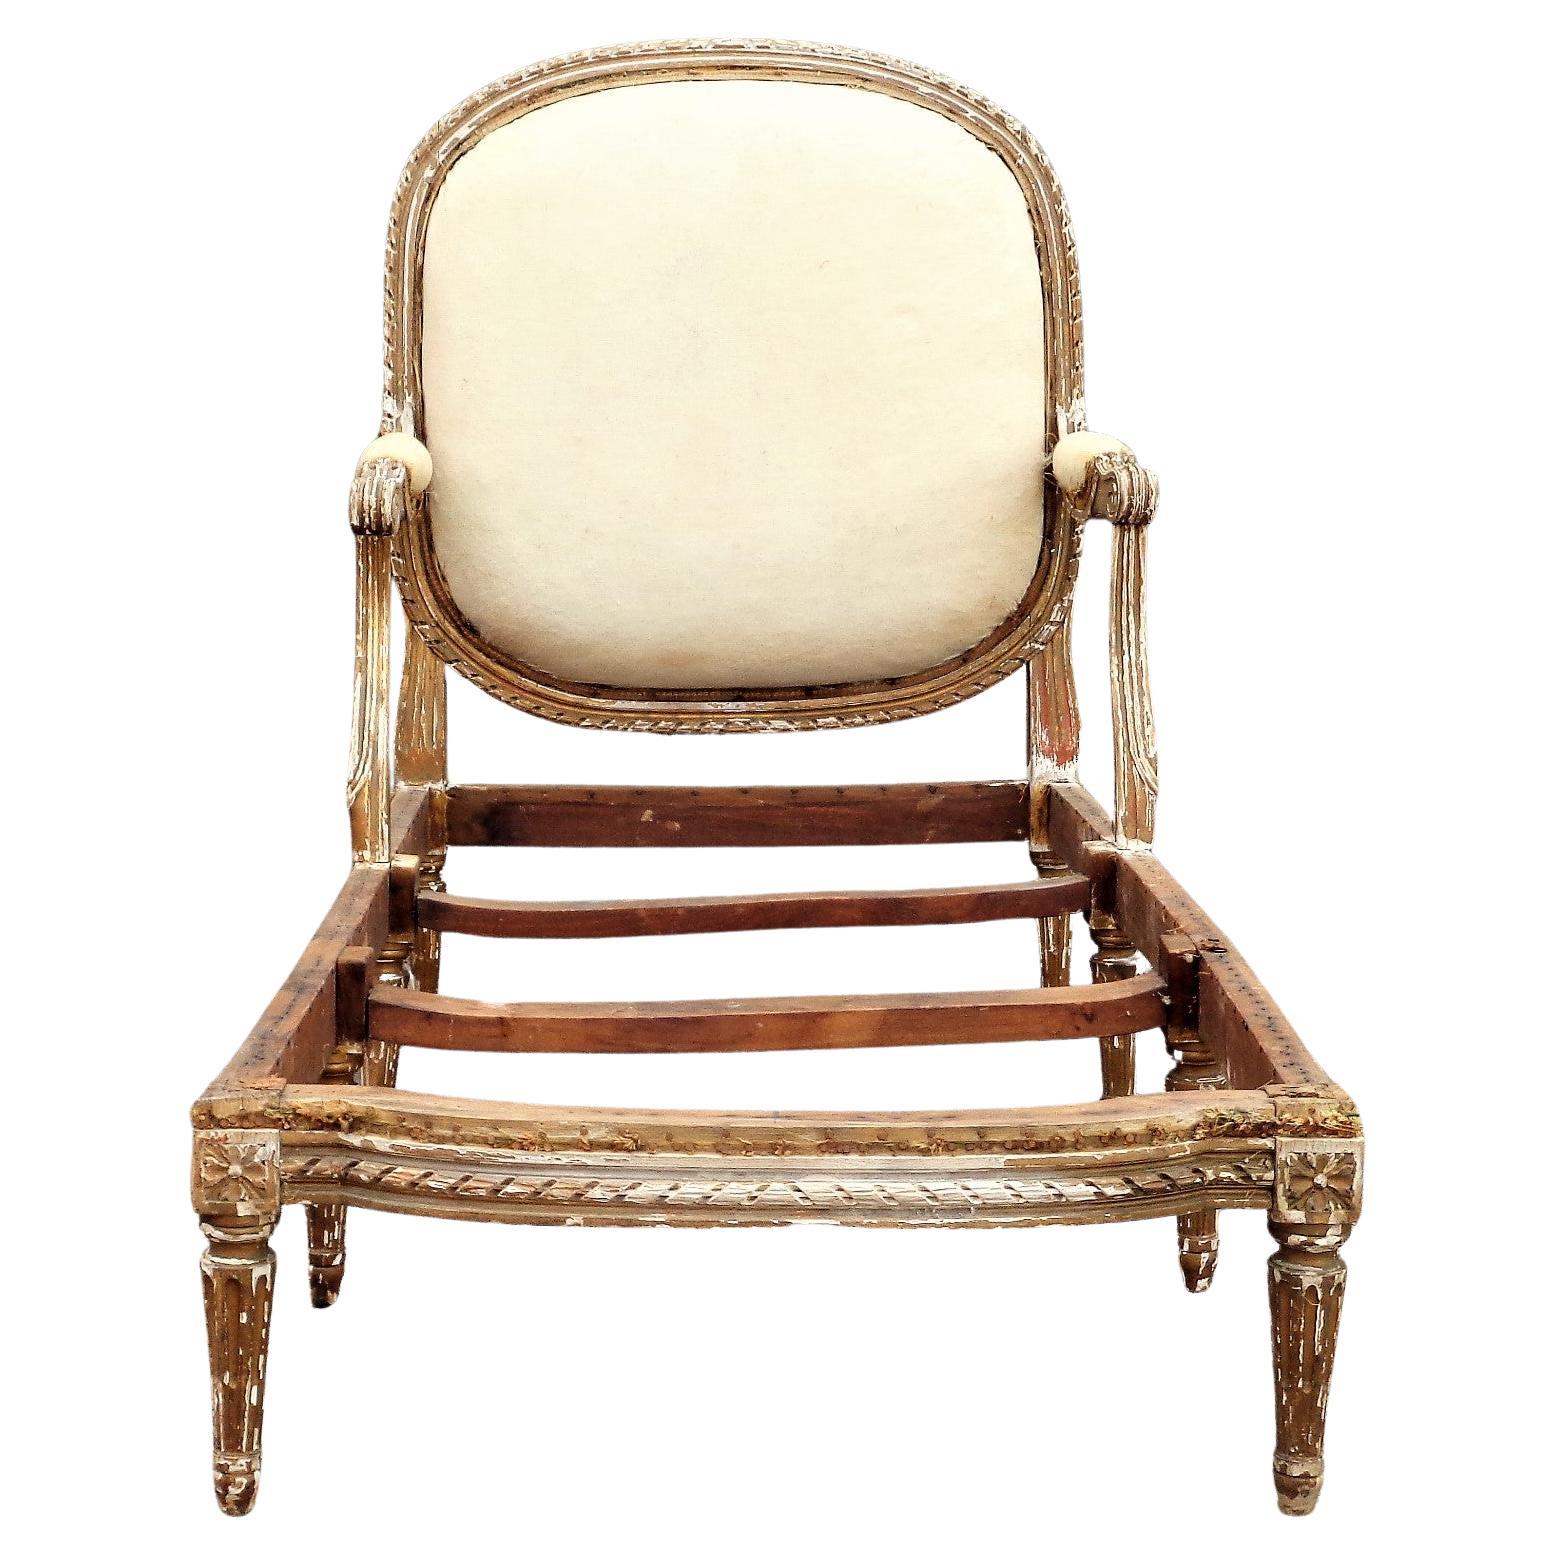 Hand-Carved 19th Century Louis XVI Style Chaise Lounge